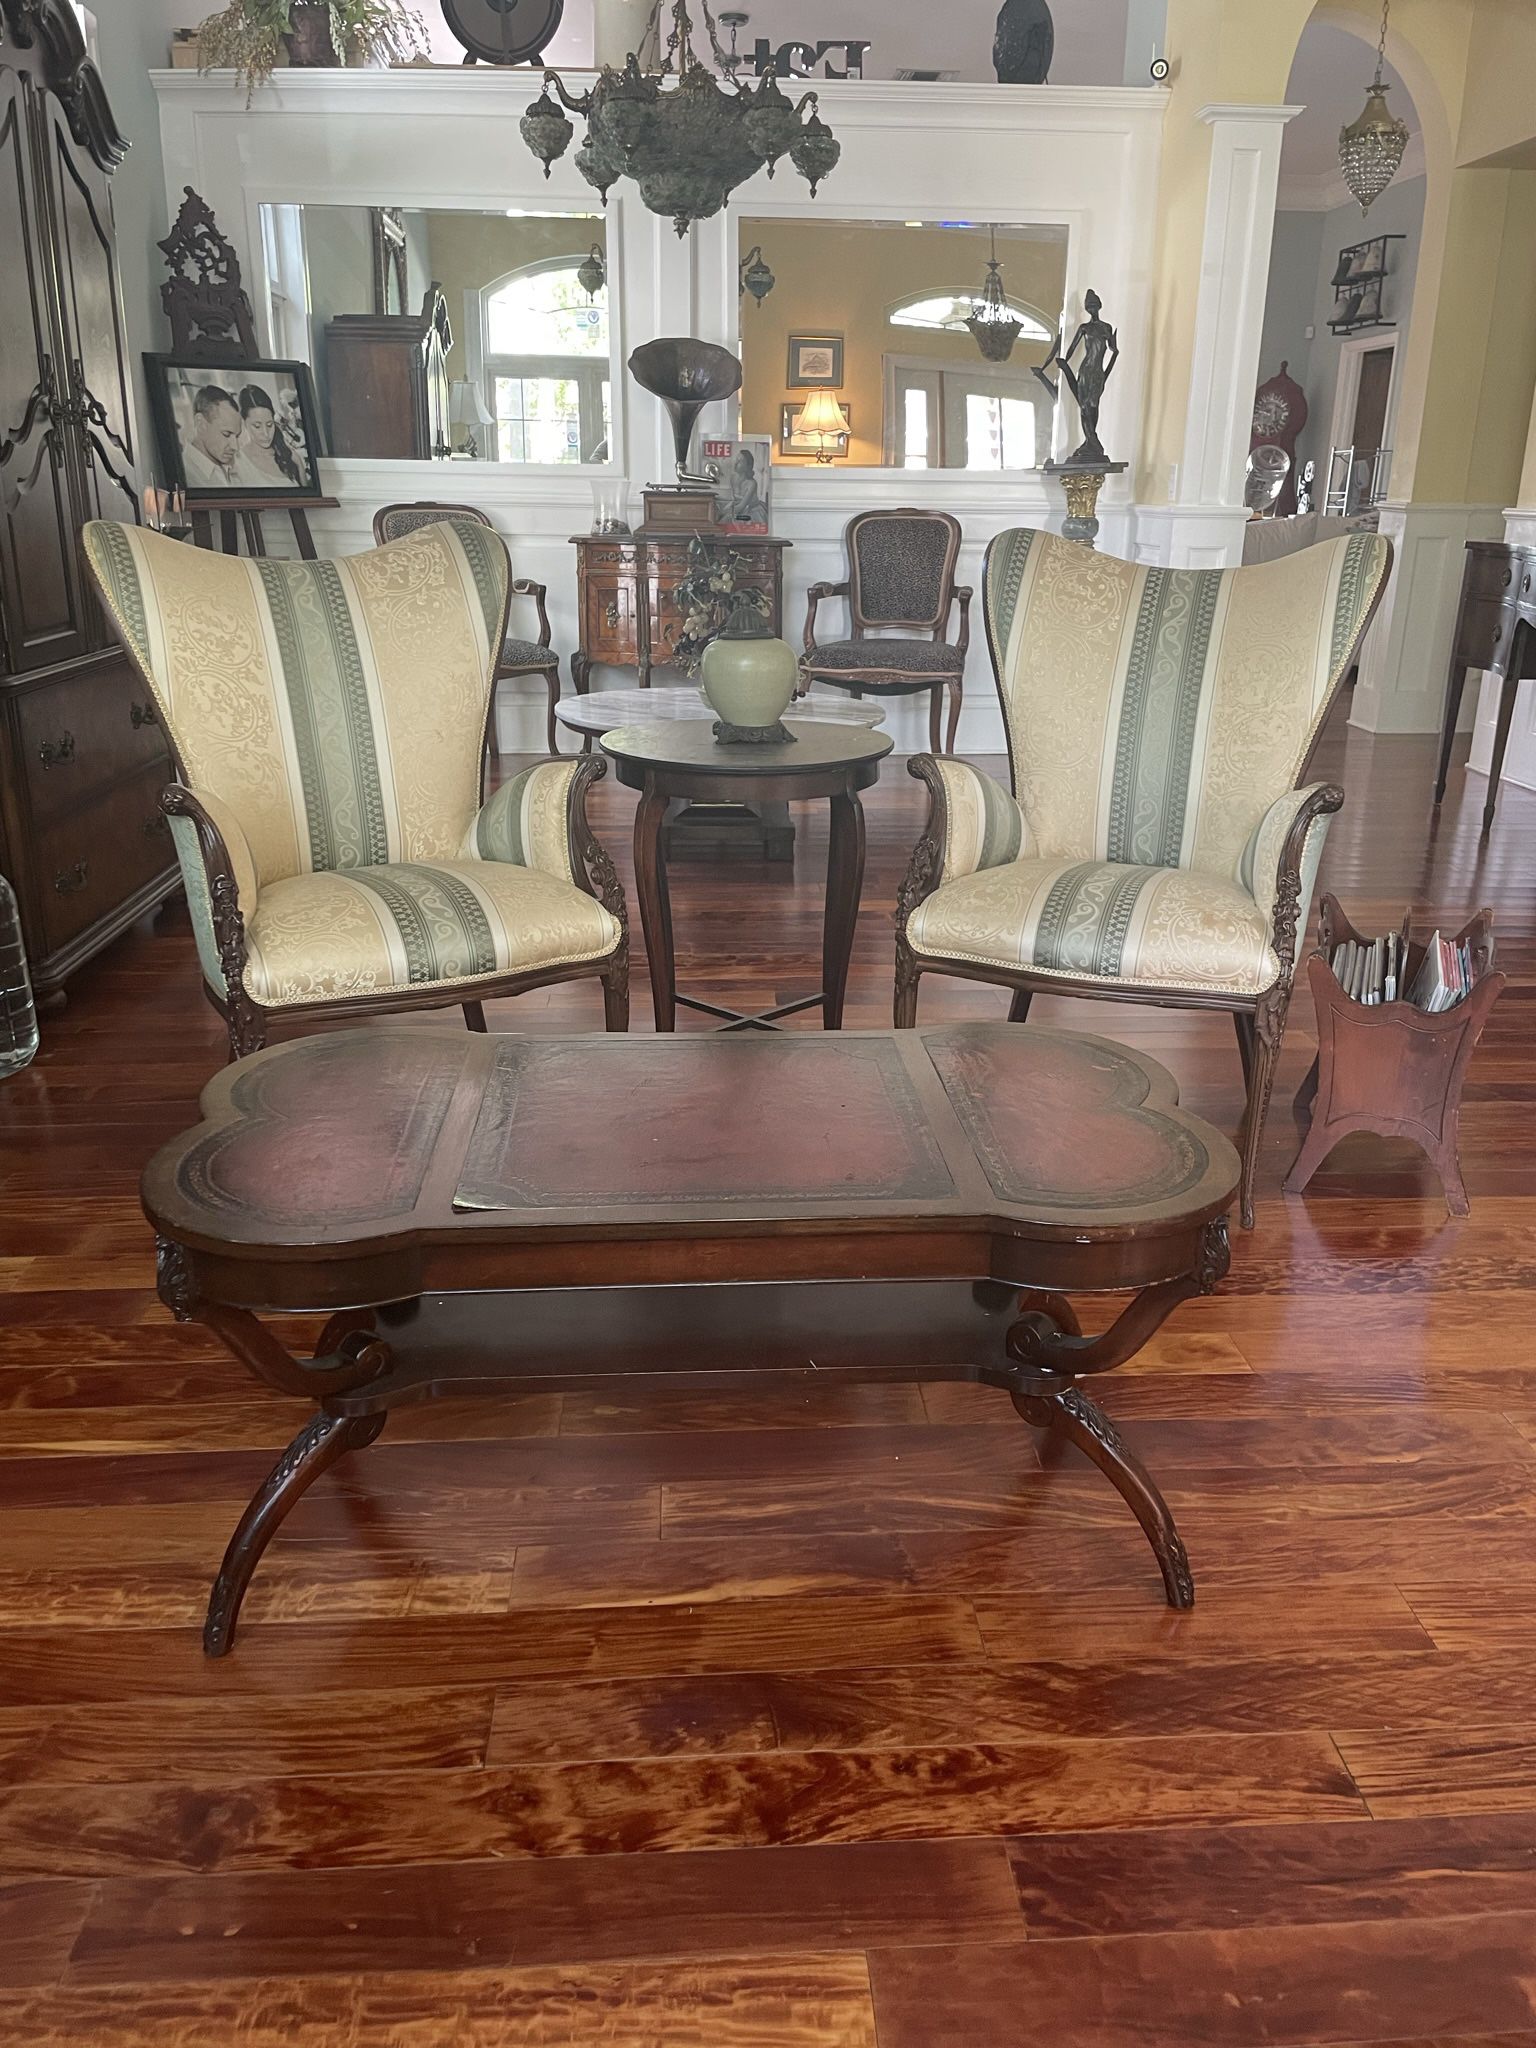 Wingback Armchairs Chairs (x2)